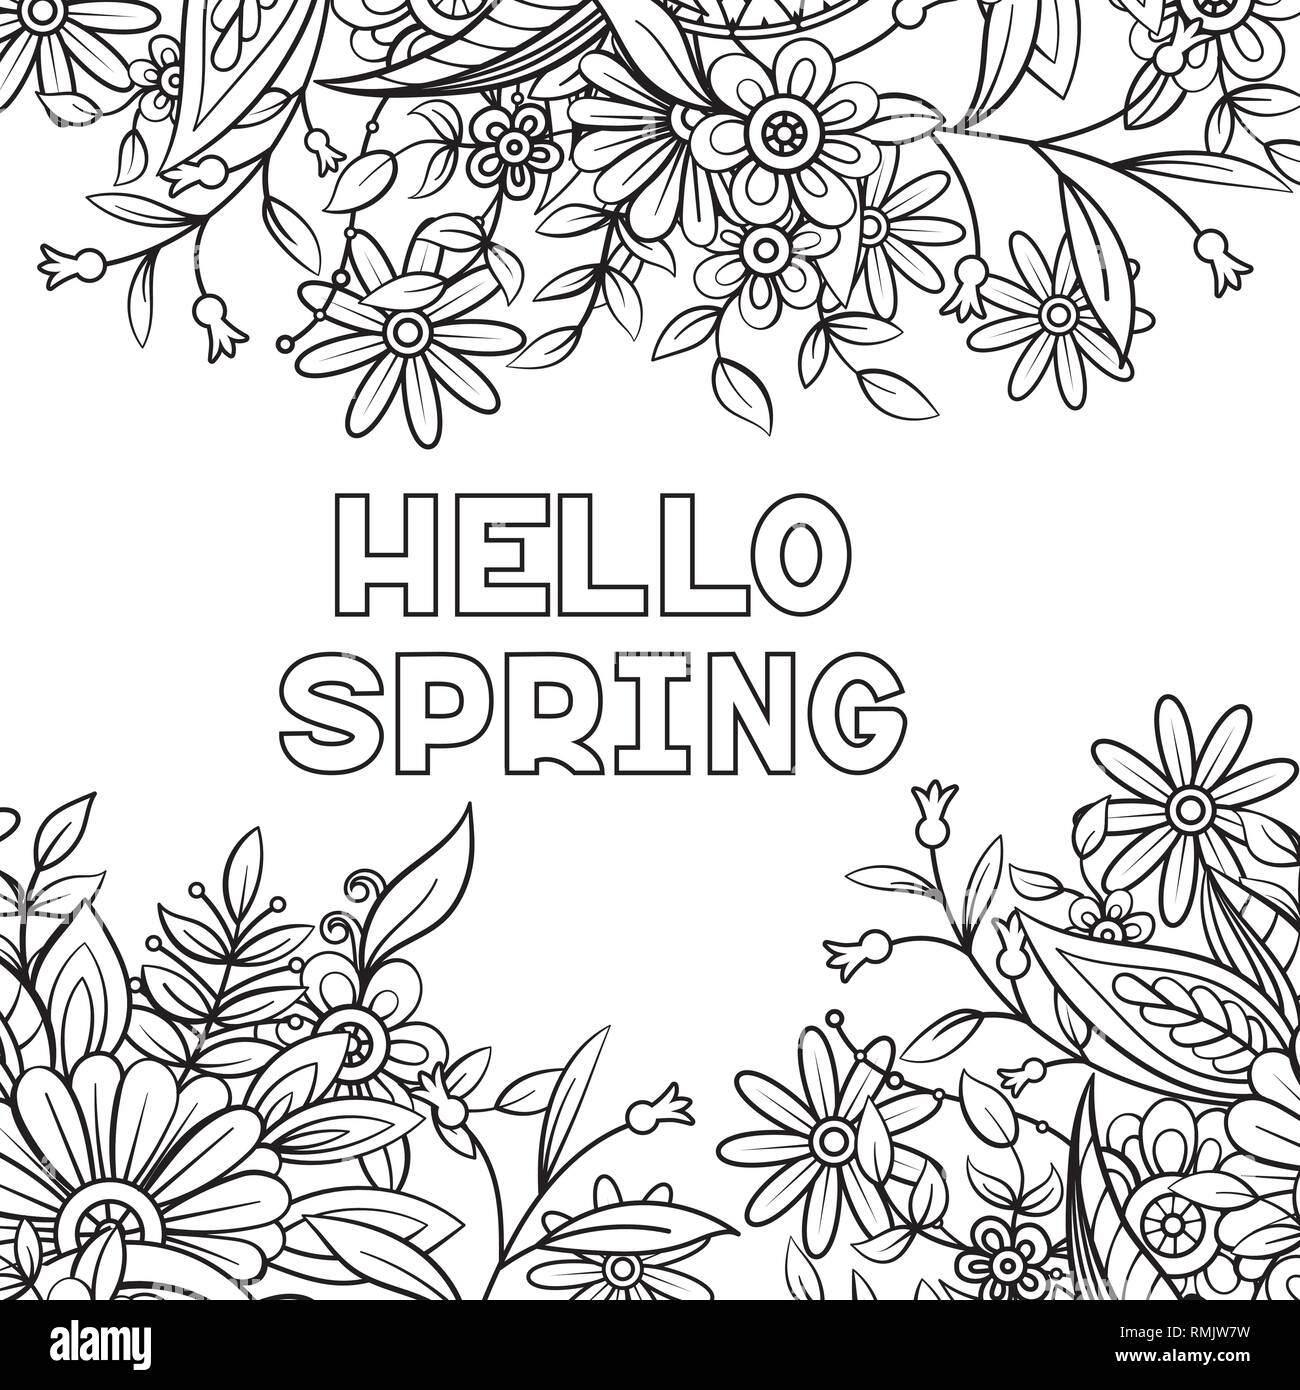 Hello spring coloring page with beautiful flowers black and white vector illustration greeting card template isolated on white background stock vector image art